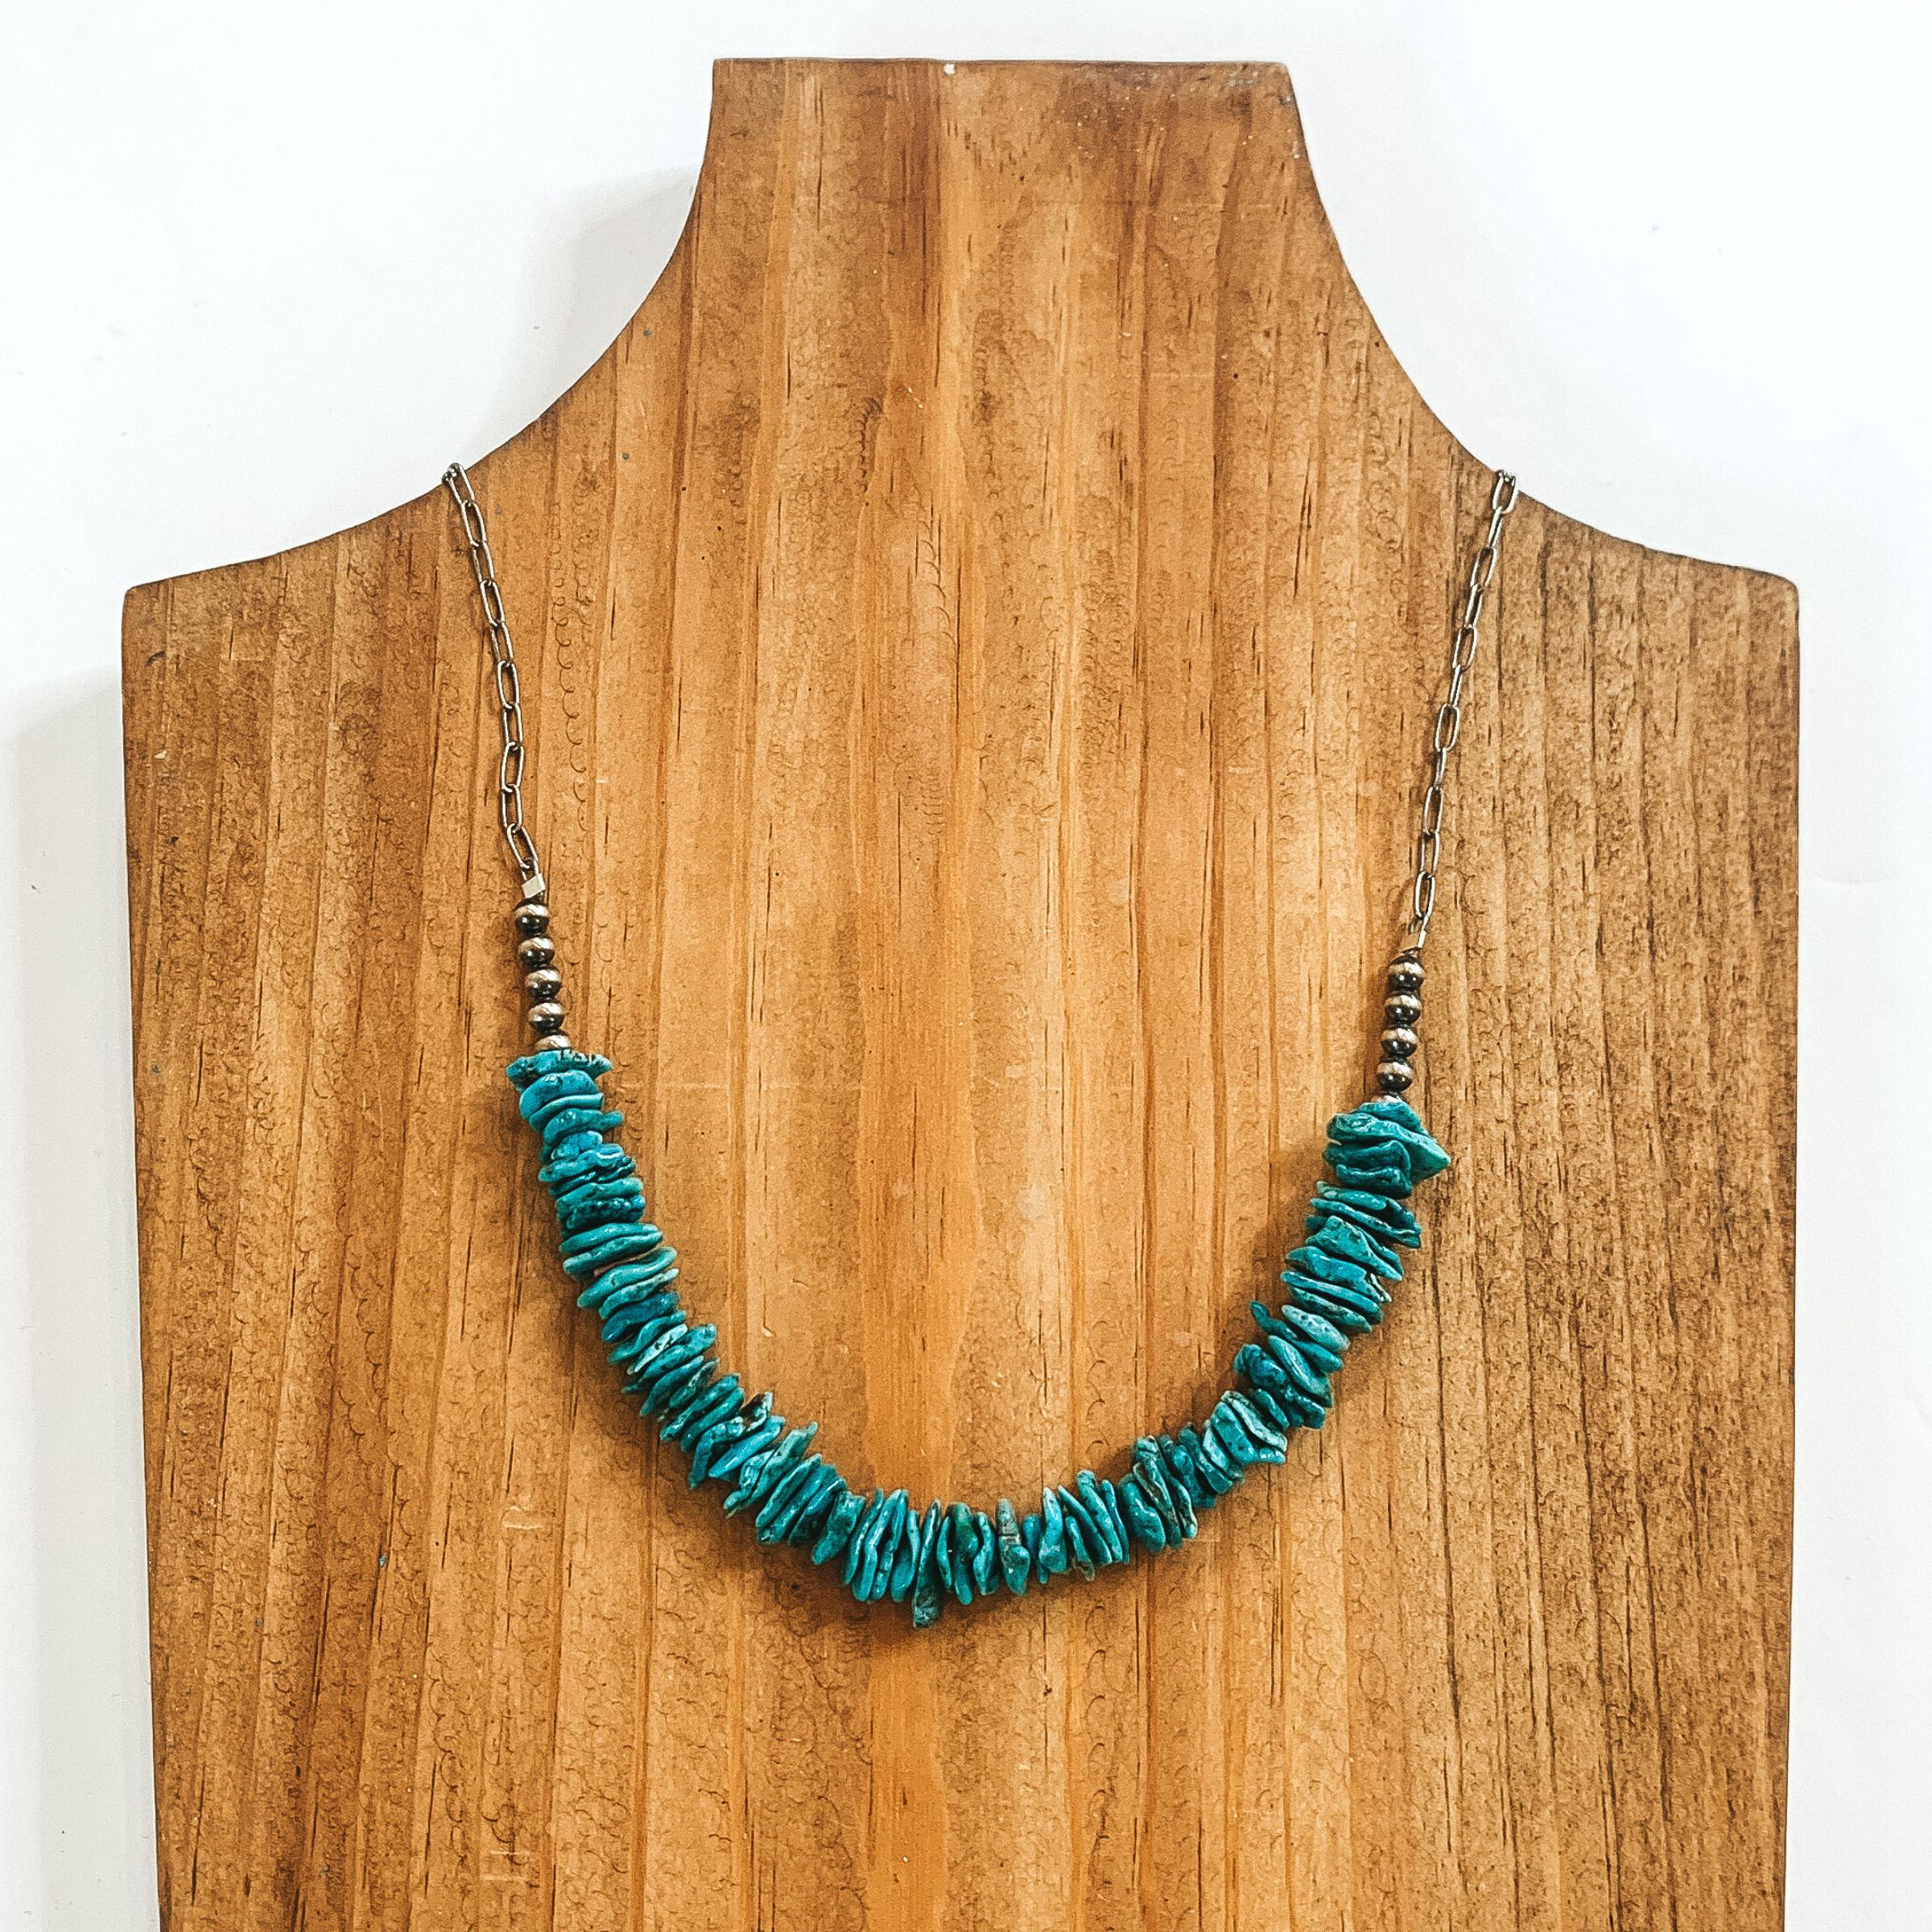 Thin paperclip chain with flat, turquoise beads on the bottom half. This necklace is pictured on a wood necklace holder on a white background. 